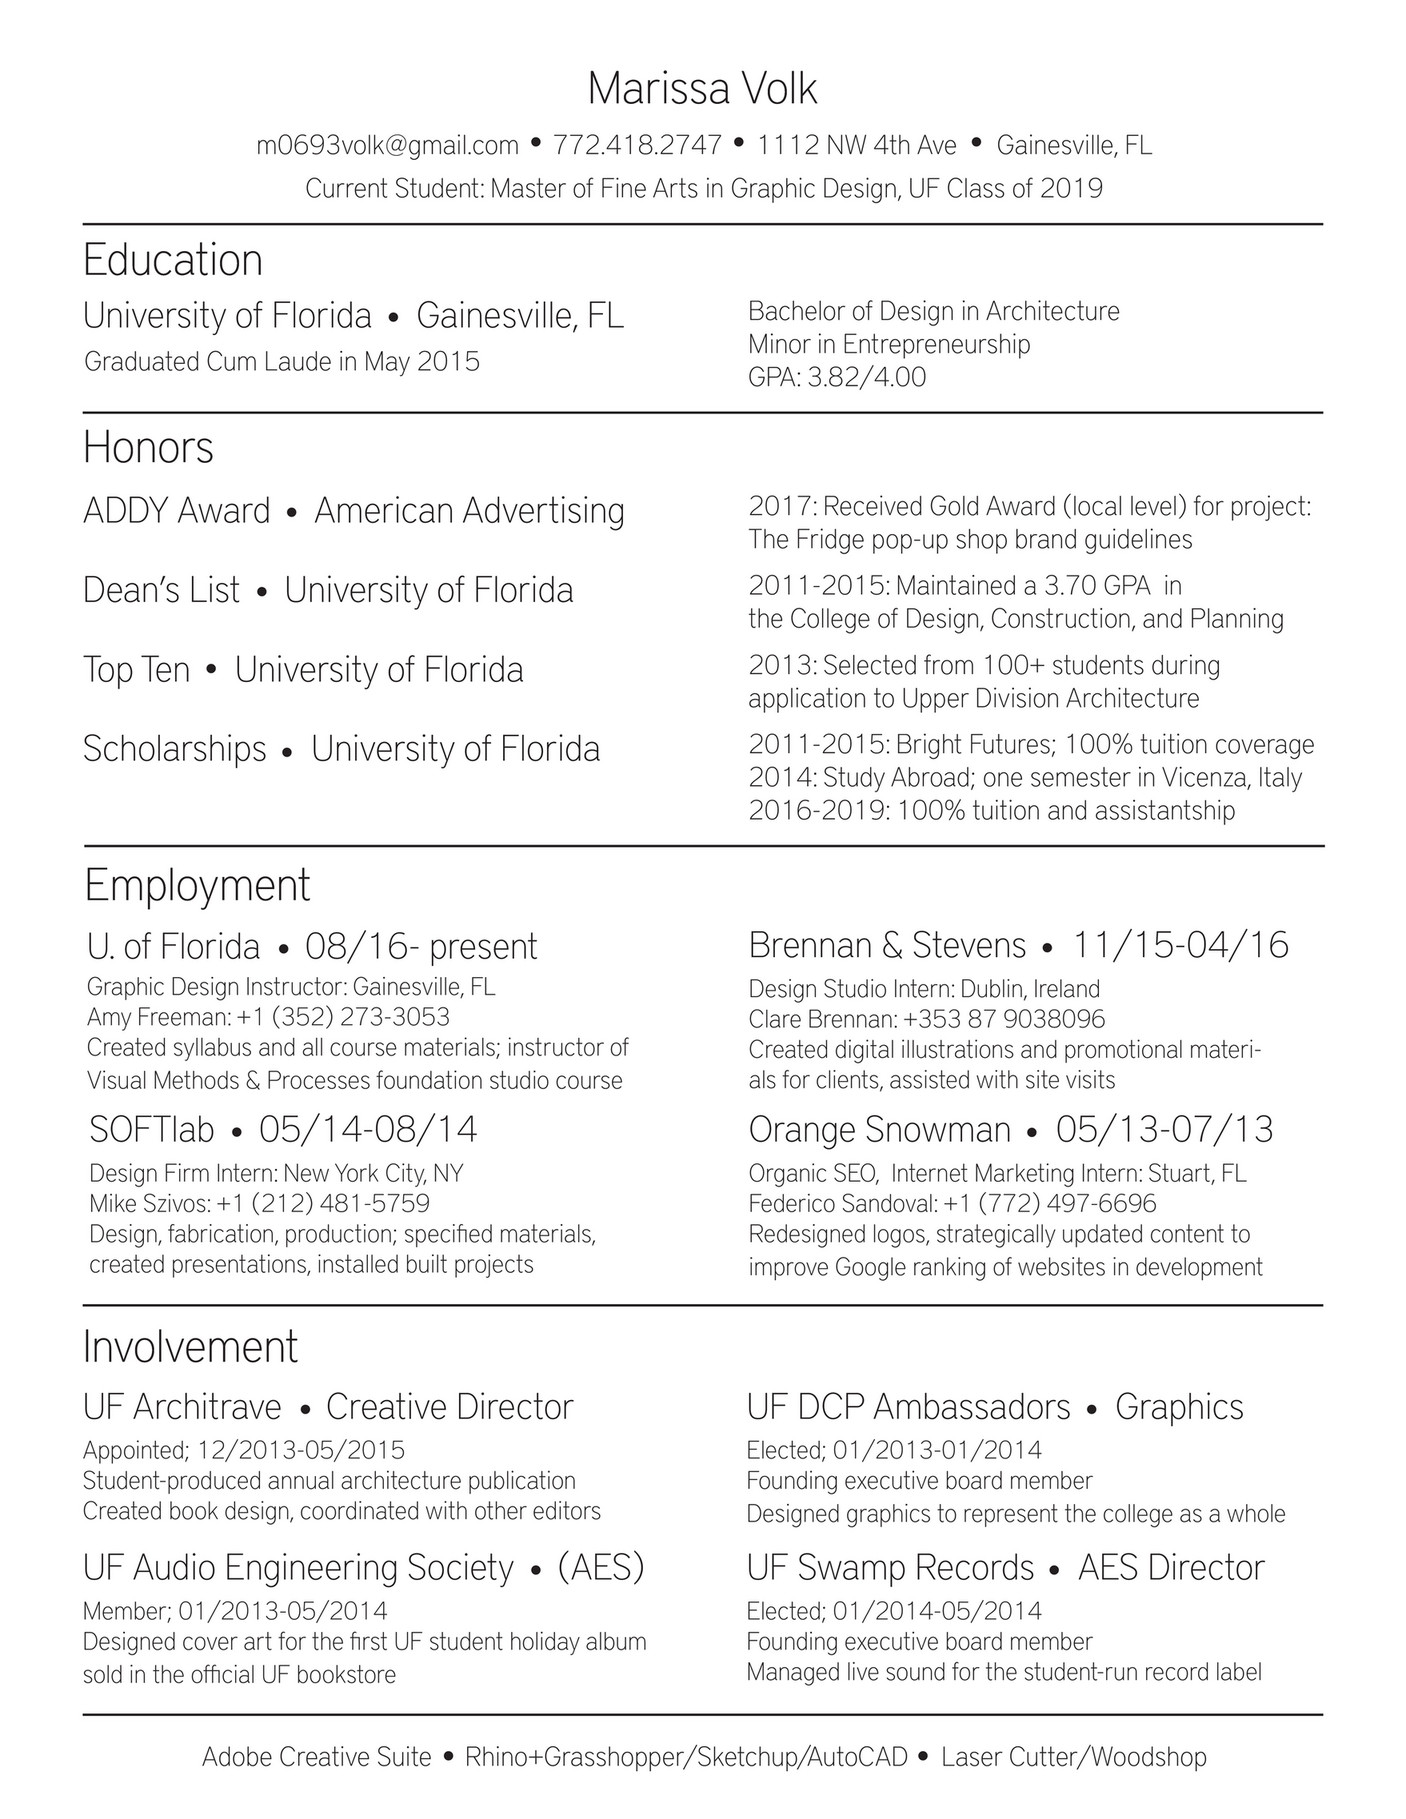 university-of-florida-resume-page-1-created-with-publitas